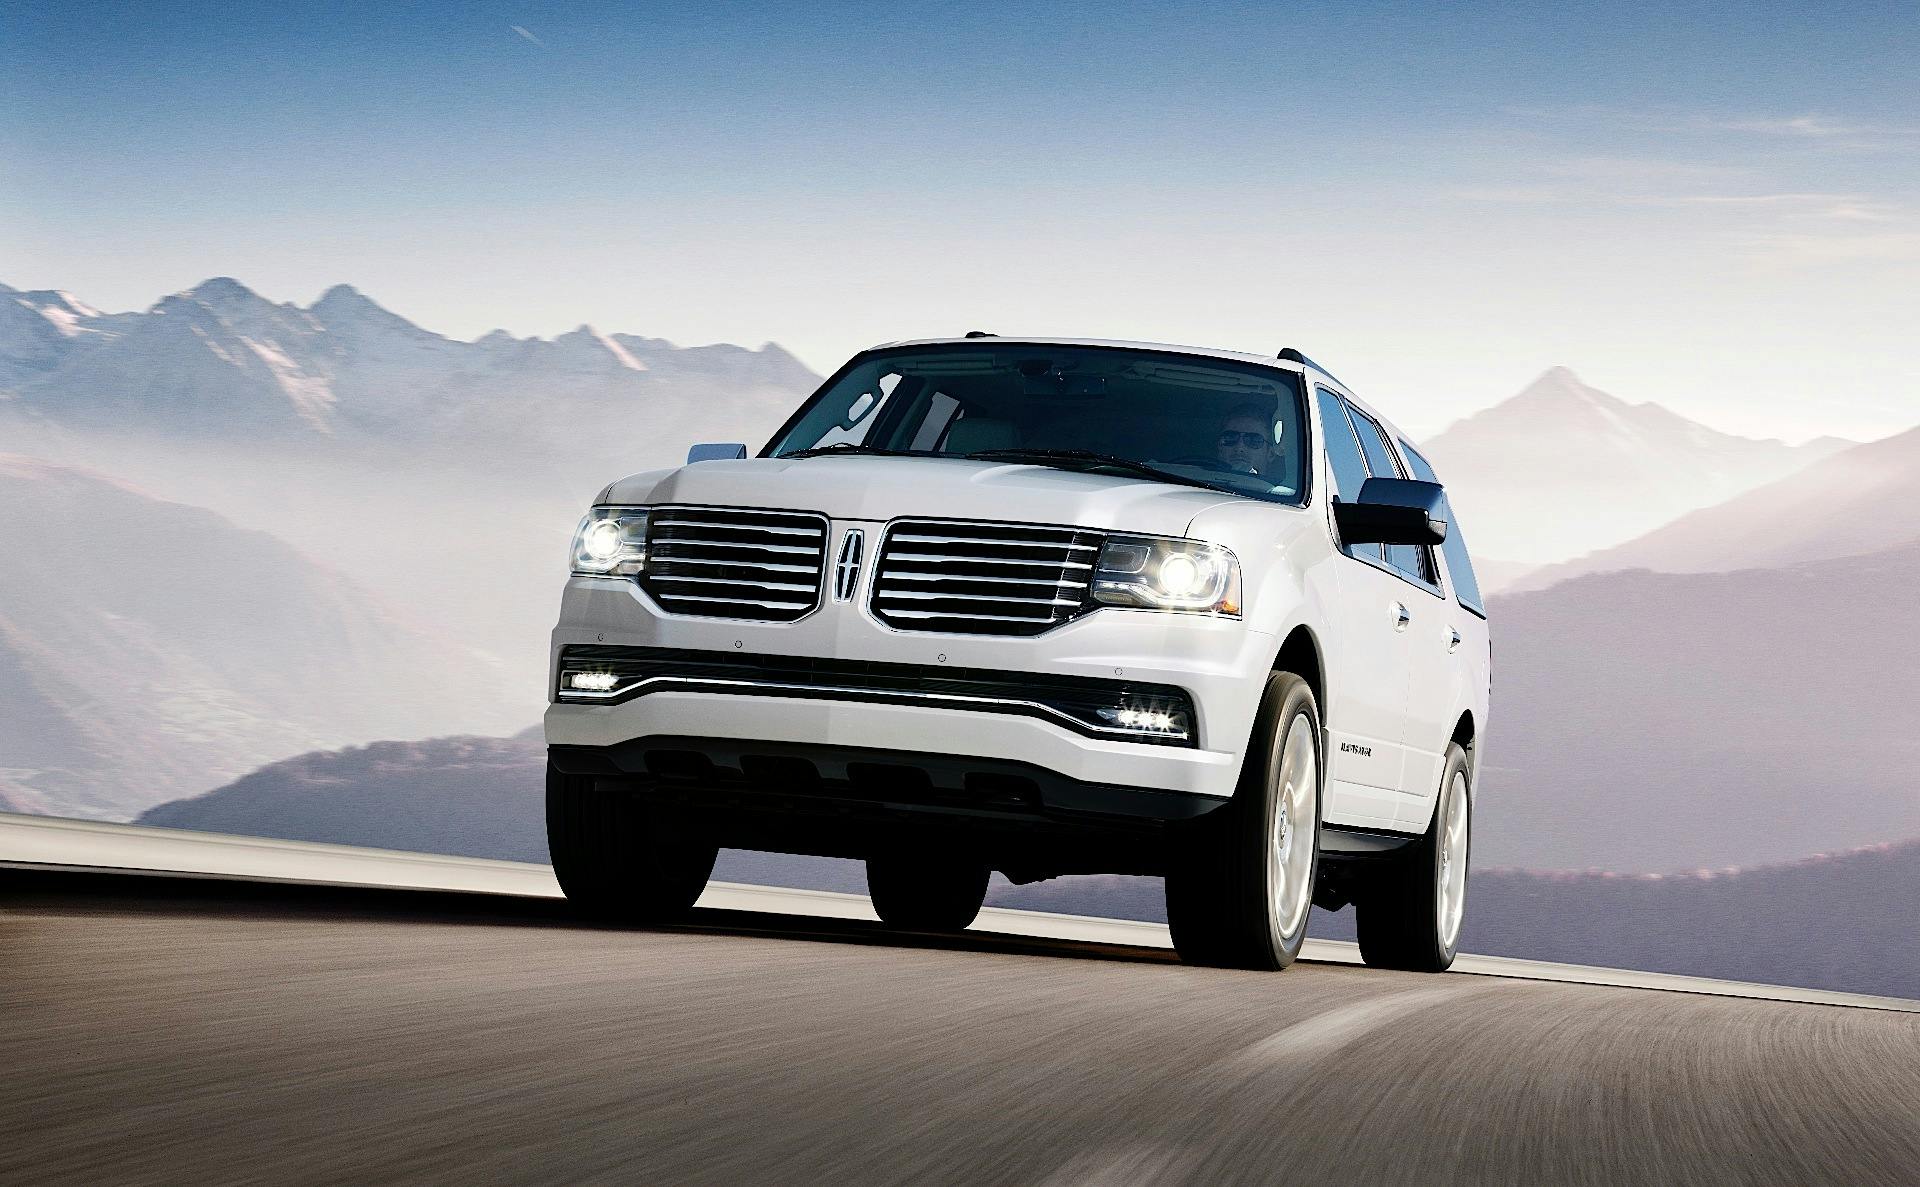 Facelifted 2014 Lincoln Navigator